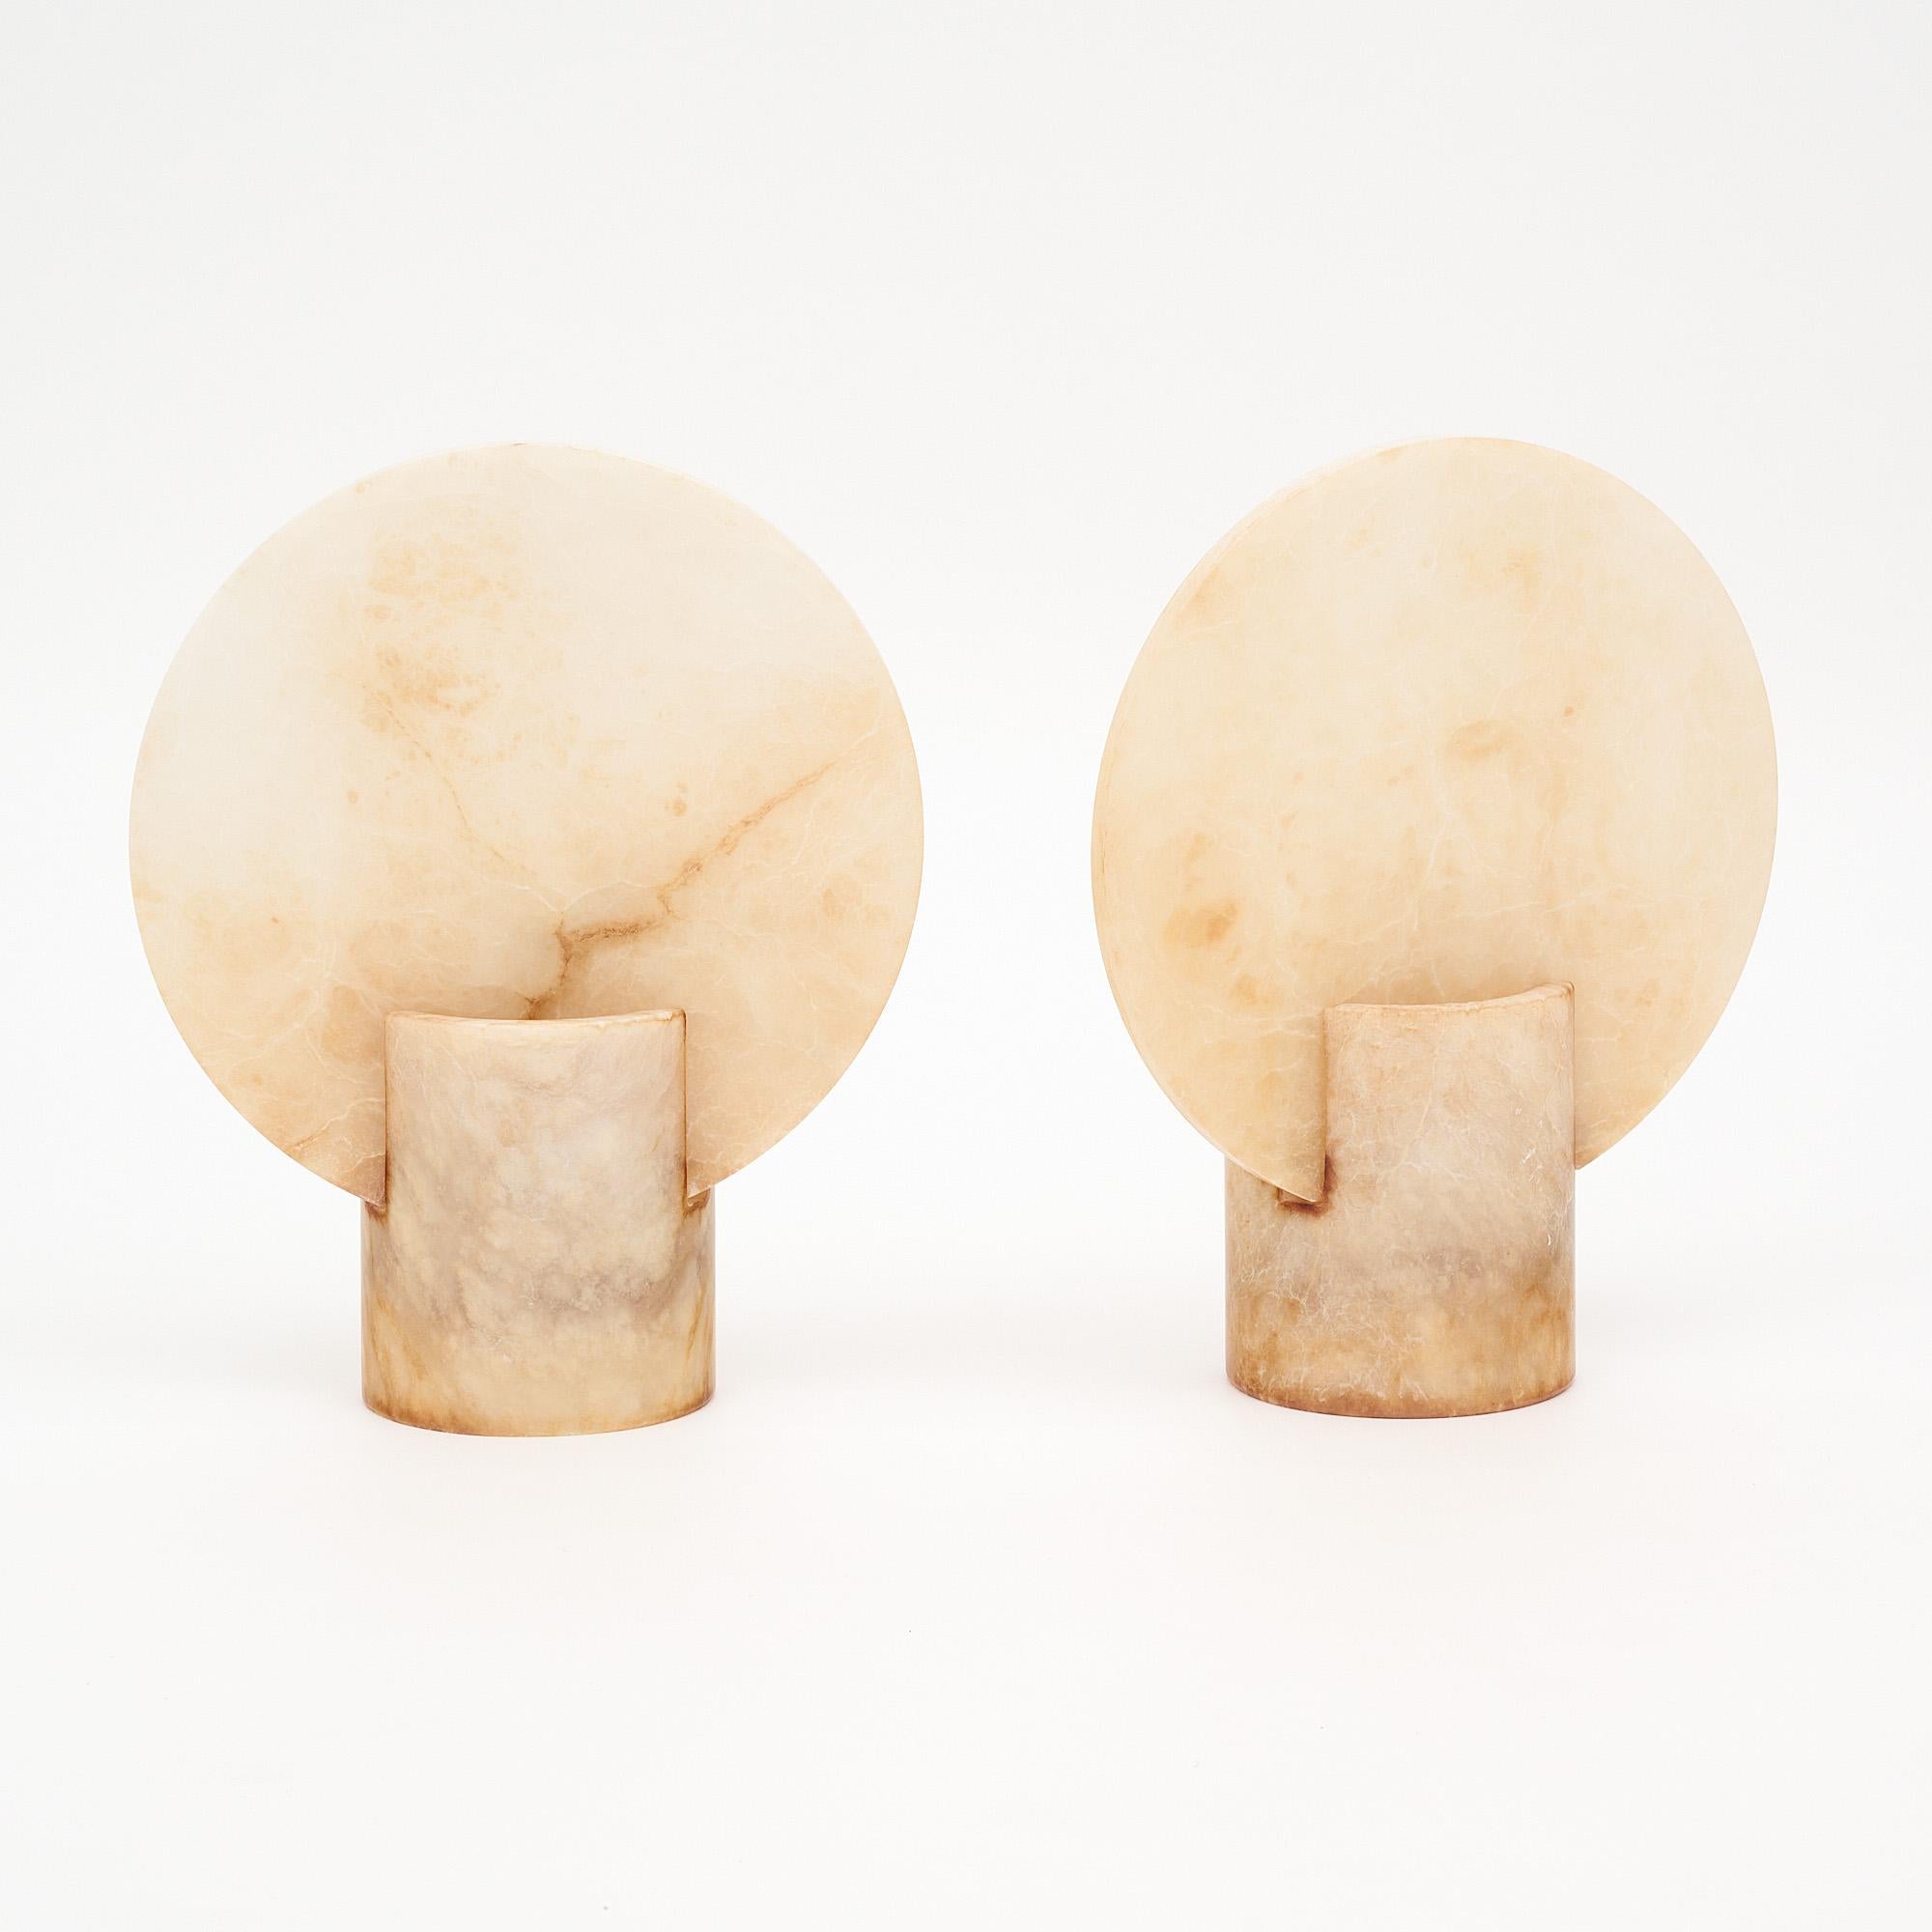 Pair of vintage Spanish lamps made of alabaster. Each features a cylindrical base which holds a round alabaster screen. The light emitted creates a beautiful warm glow. They have been newly wired to fit US standards.